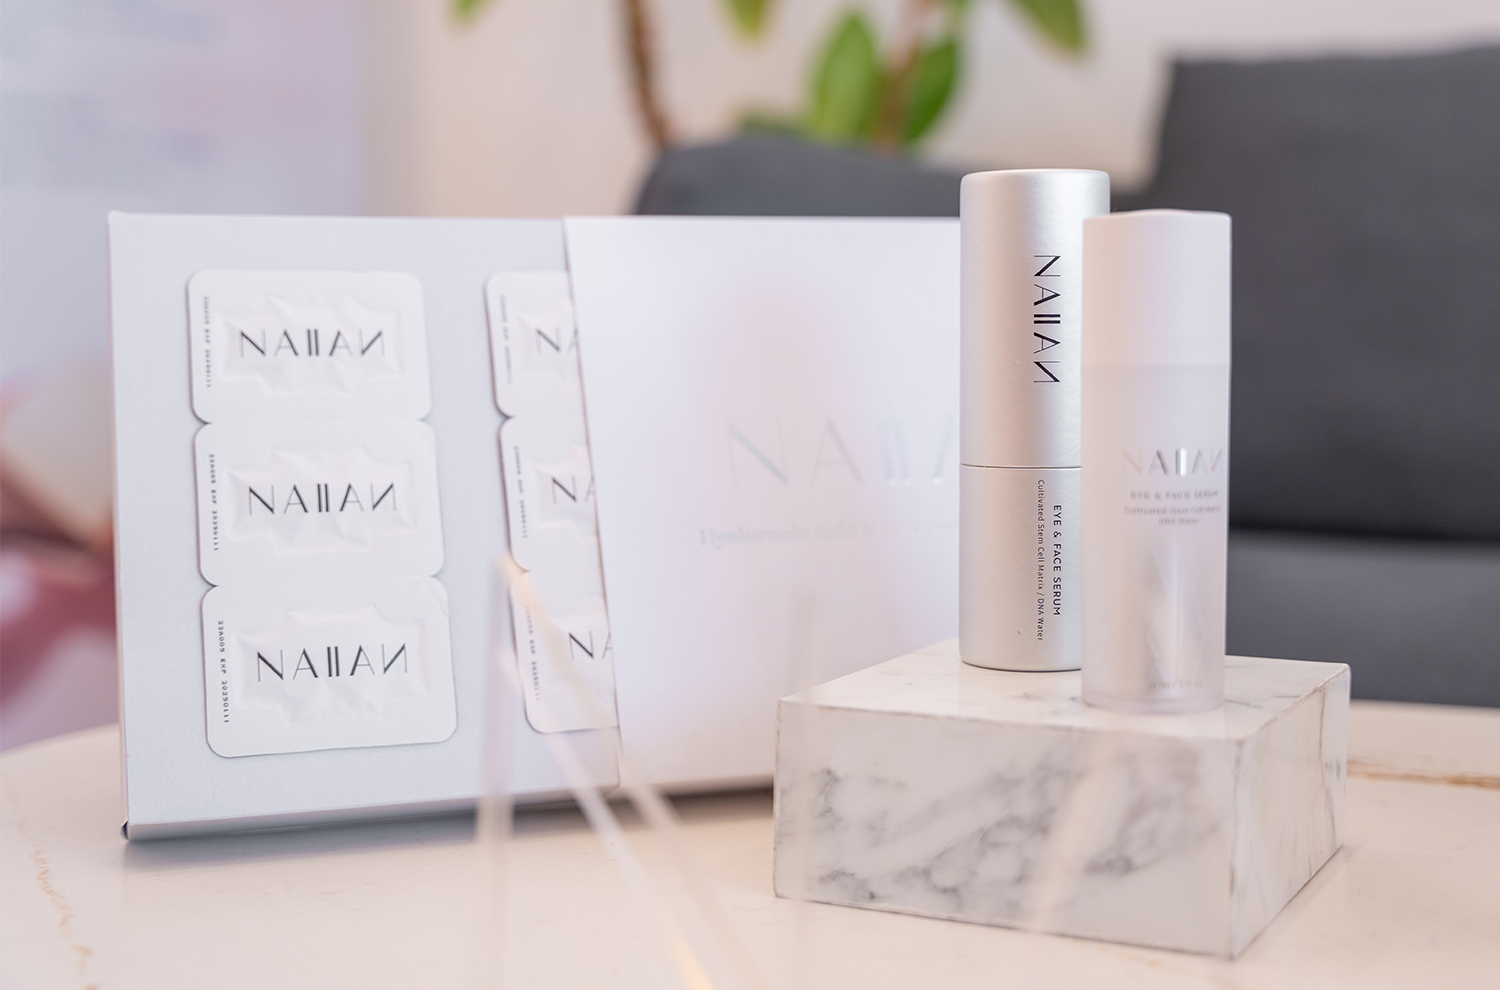 NAIIAN's signature products, Eye and Face Serum and Microneedle Rolling System.